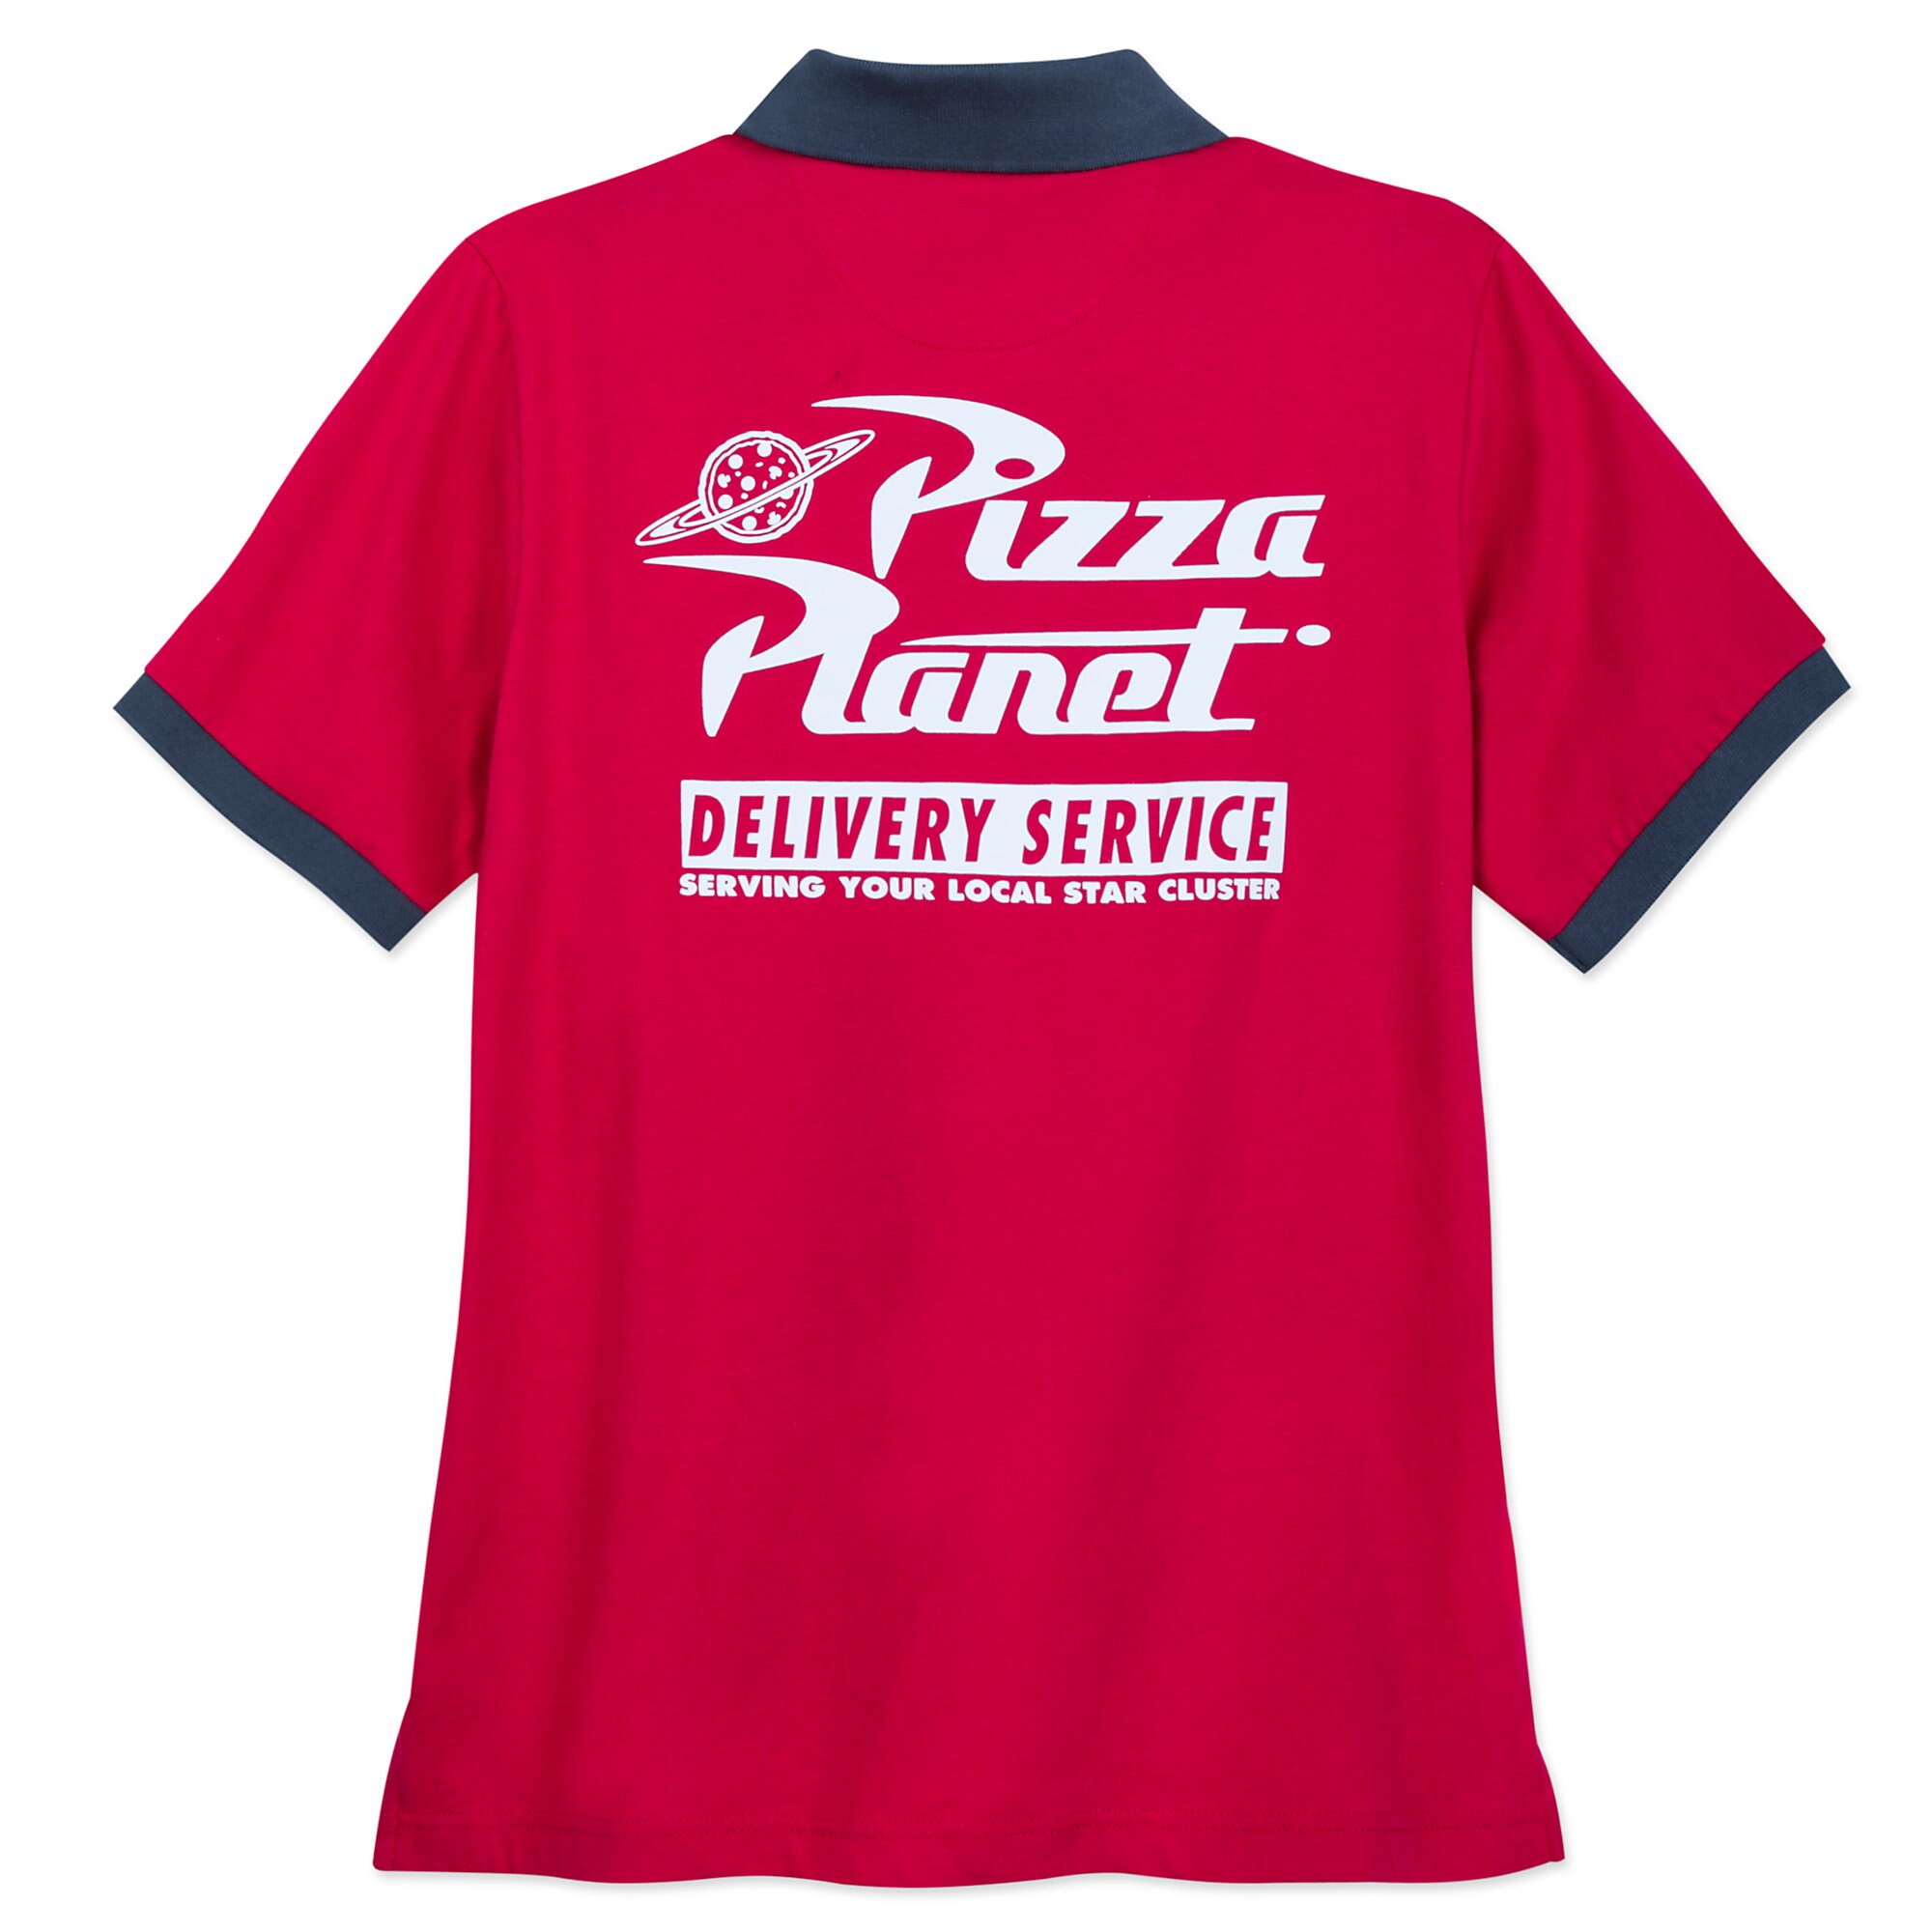 Pizza Planet Polo Shirt for Men - Toy Story